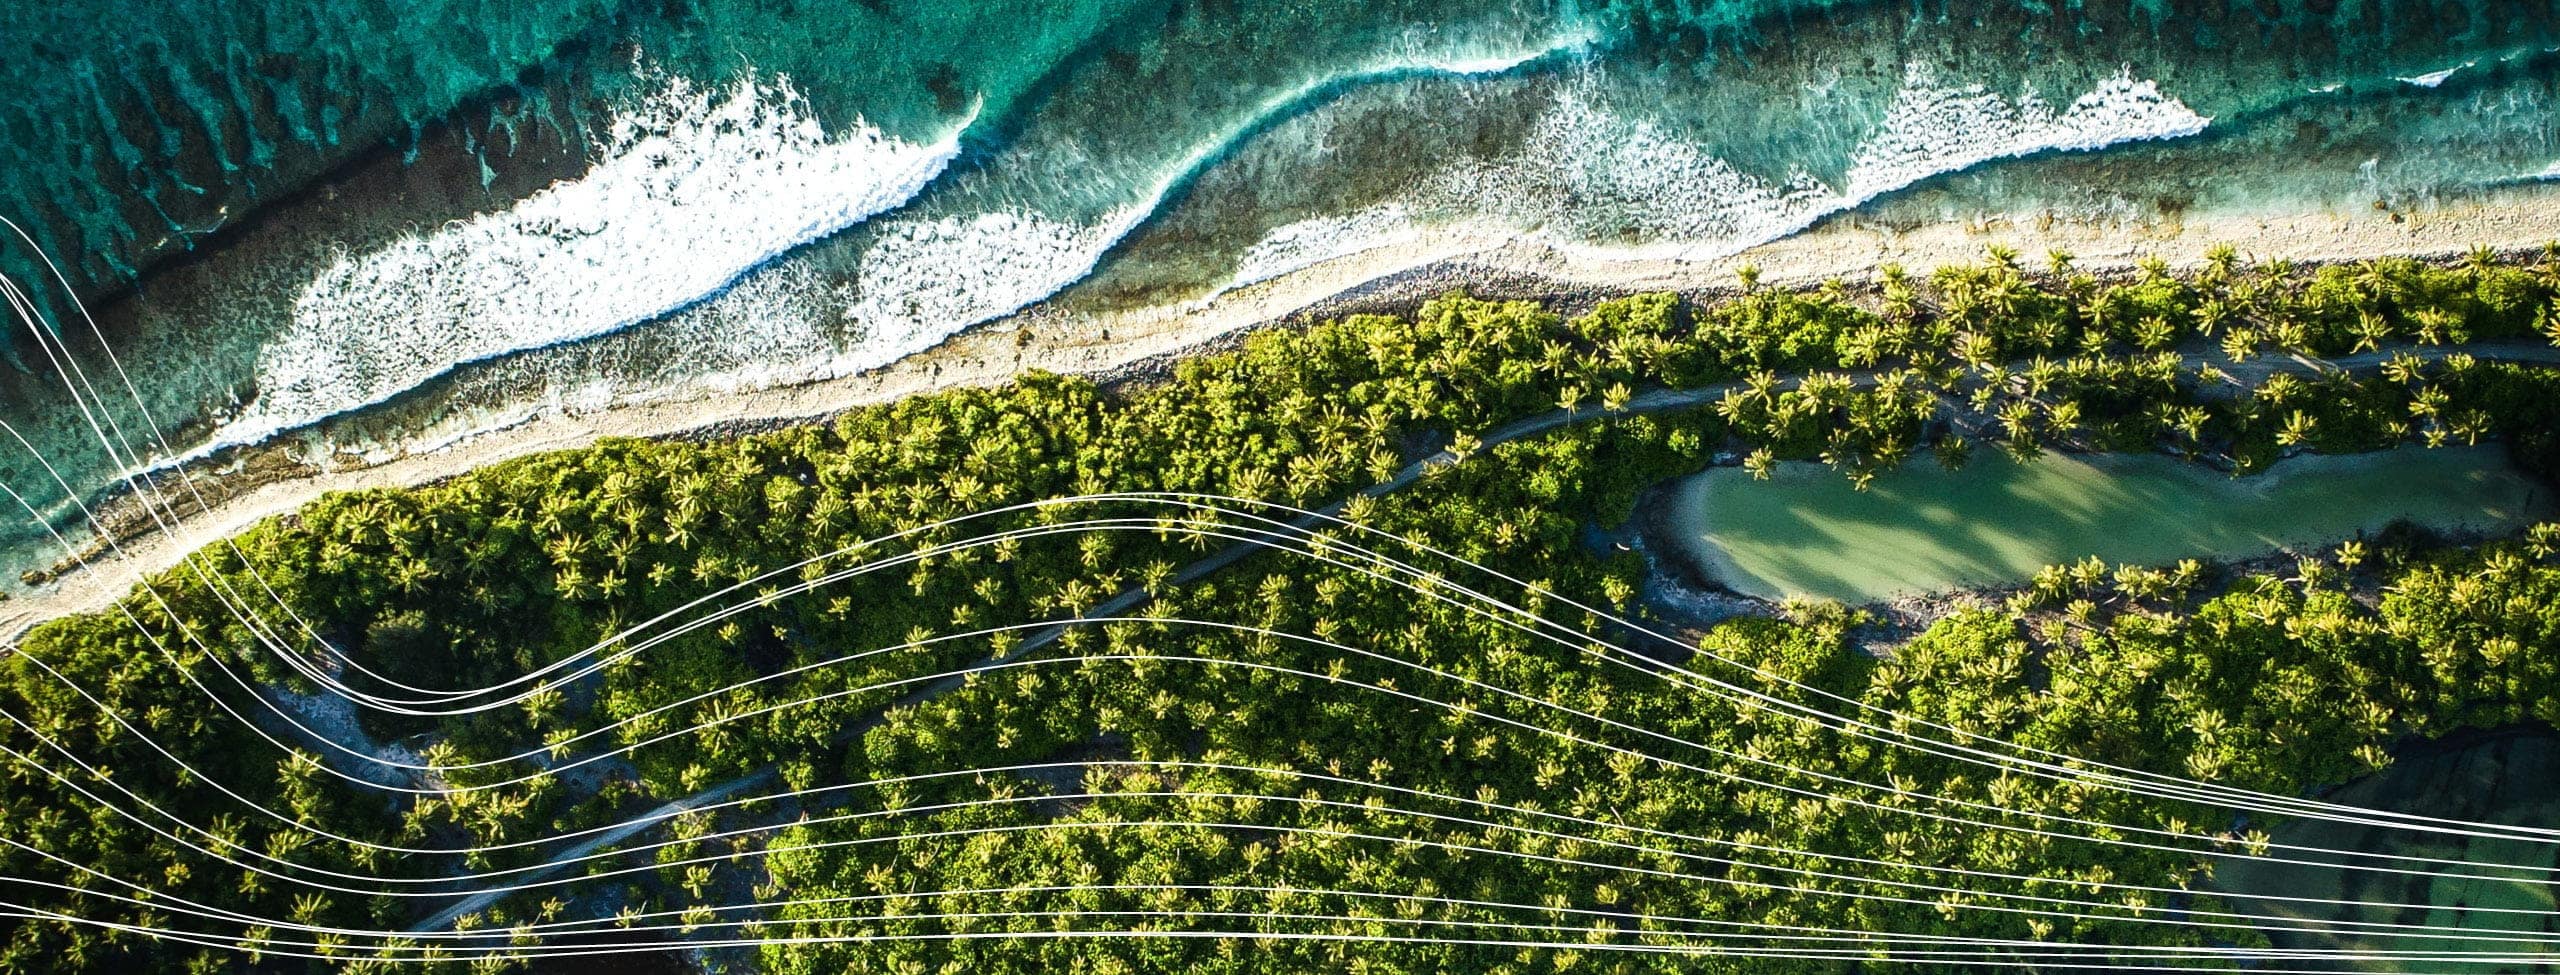 Ocean and trees from above